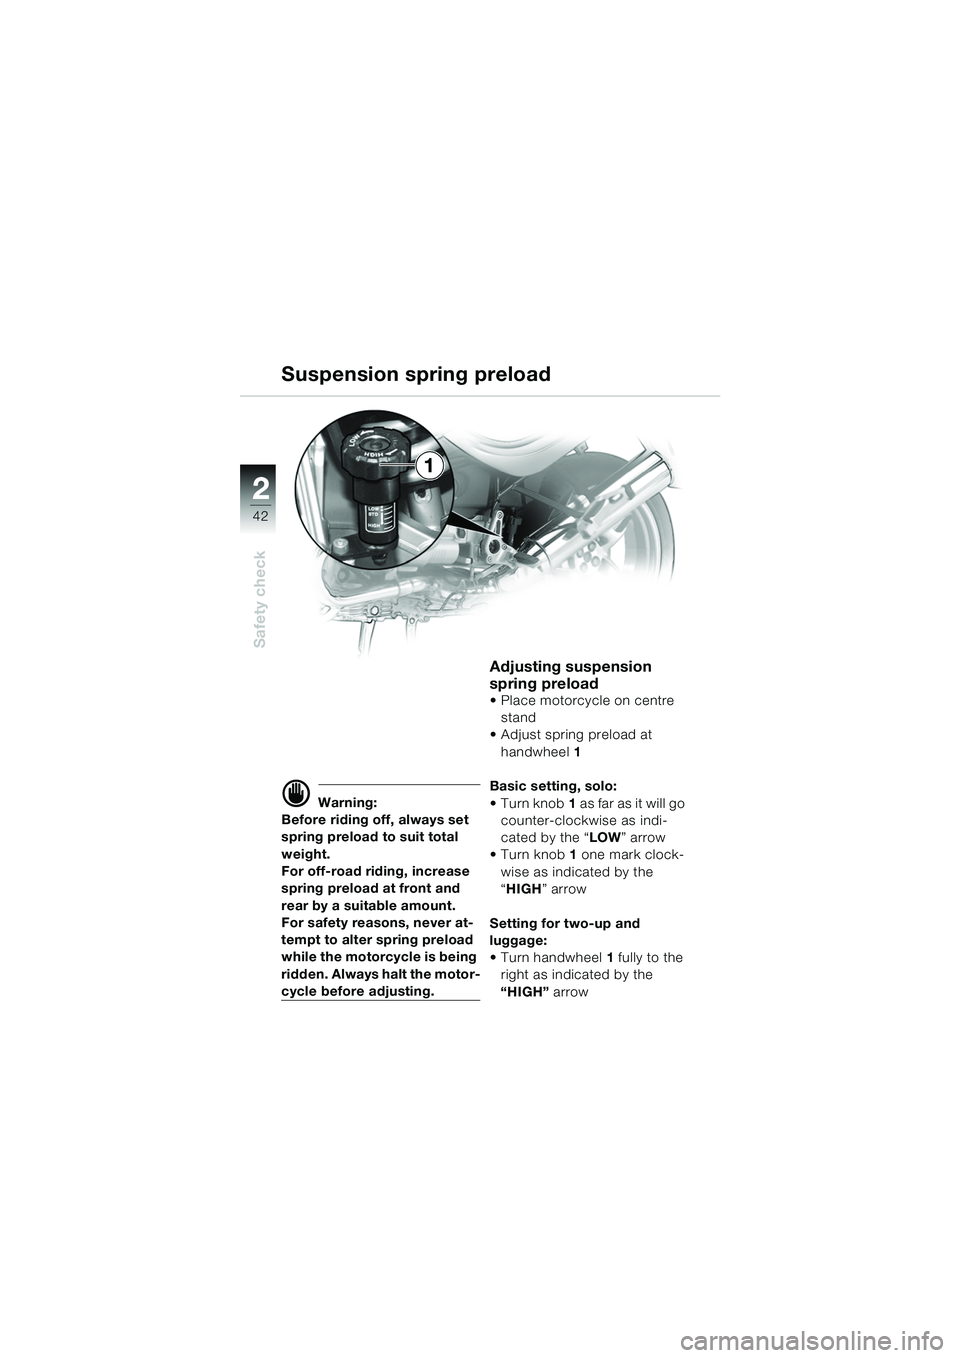 BMW MOTORRAD R 850 R 2004  Riders Manual (in English) 22
42
Safety check
1
Suspension spring preload
d Warning:
Before riding off, always set 
spring preload to suit total 
weight.
For off-road riding, increase 
spring preload at front and 
rear by a sui